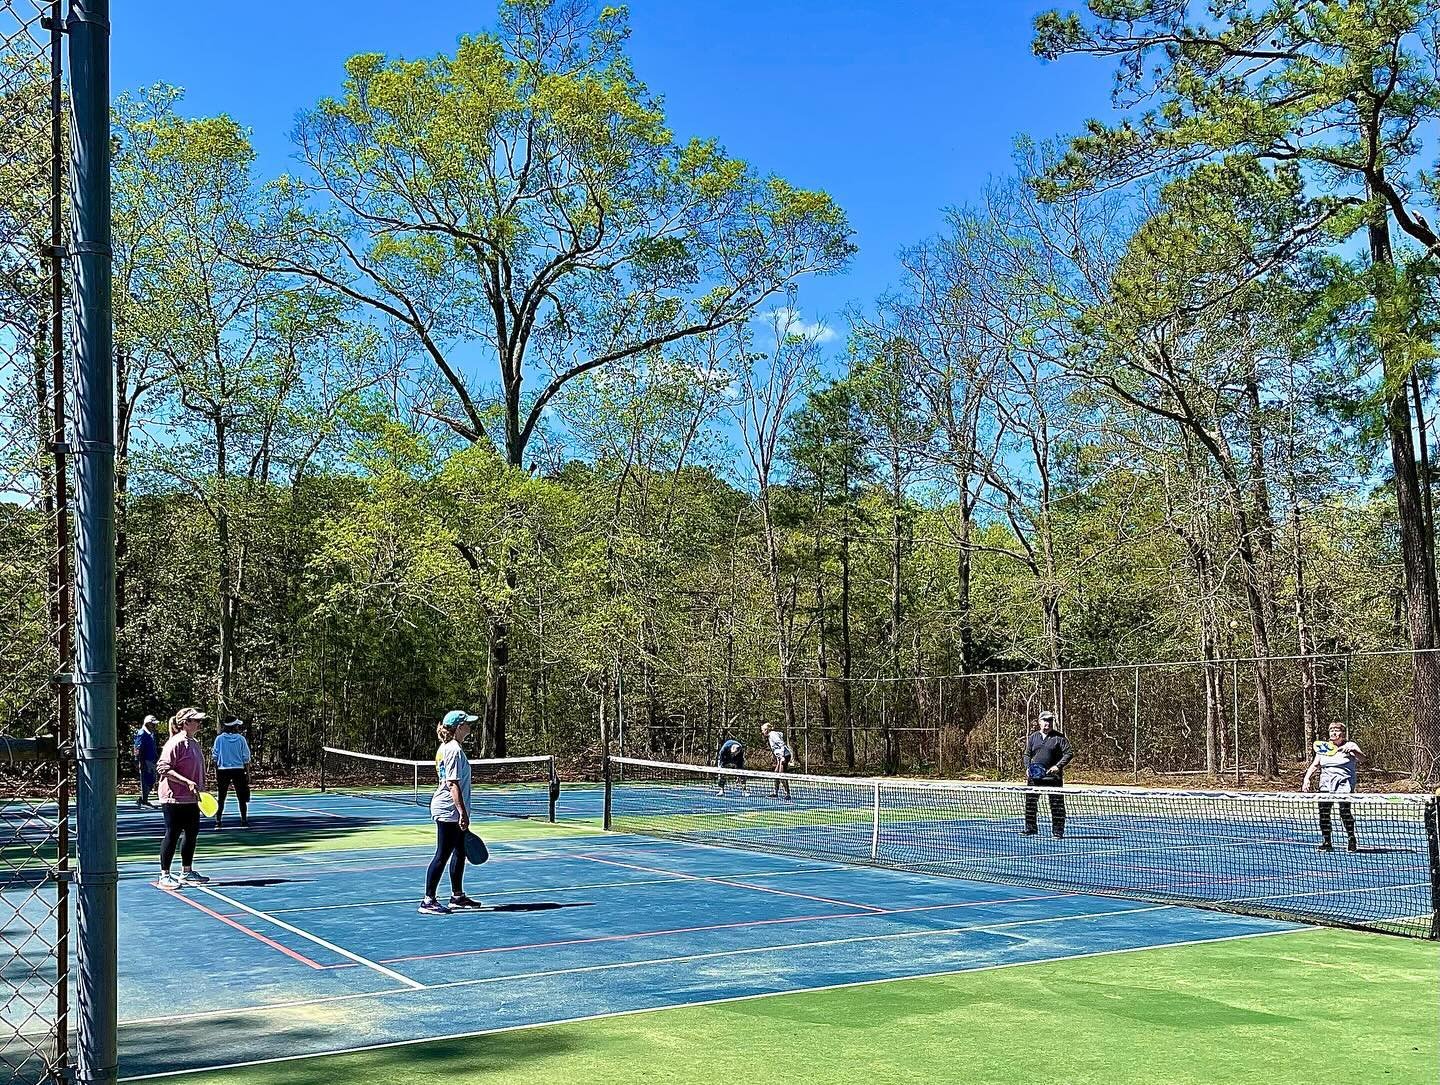 Pickleball success! We had a great time at the social yesterday - great food, music, and company! Despite a little pollen on the courts, we had some exciting round robin play. It was a good opportunity to meet new people, and there were even a few fi